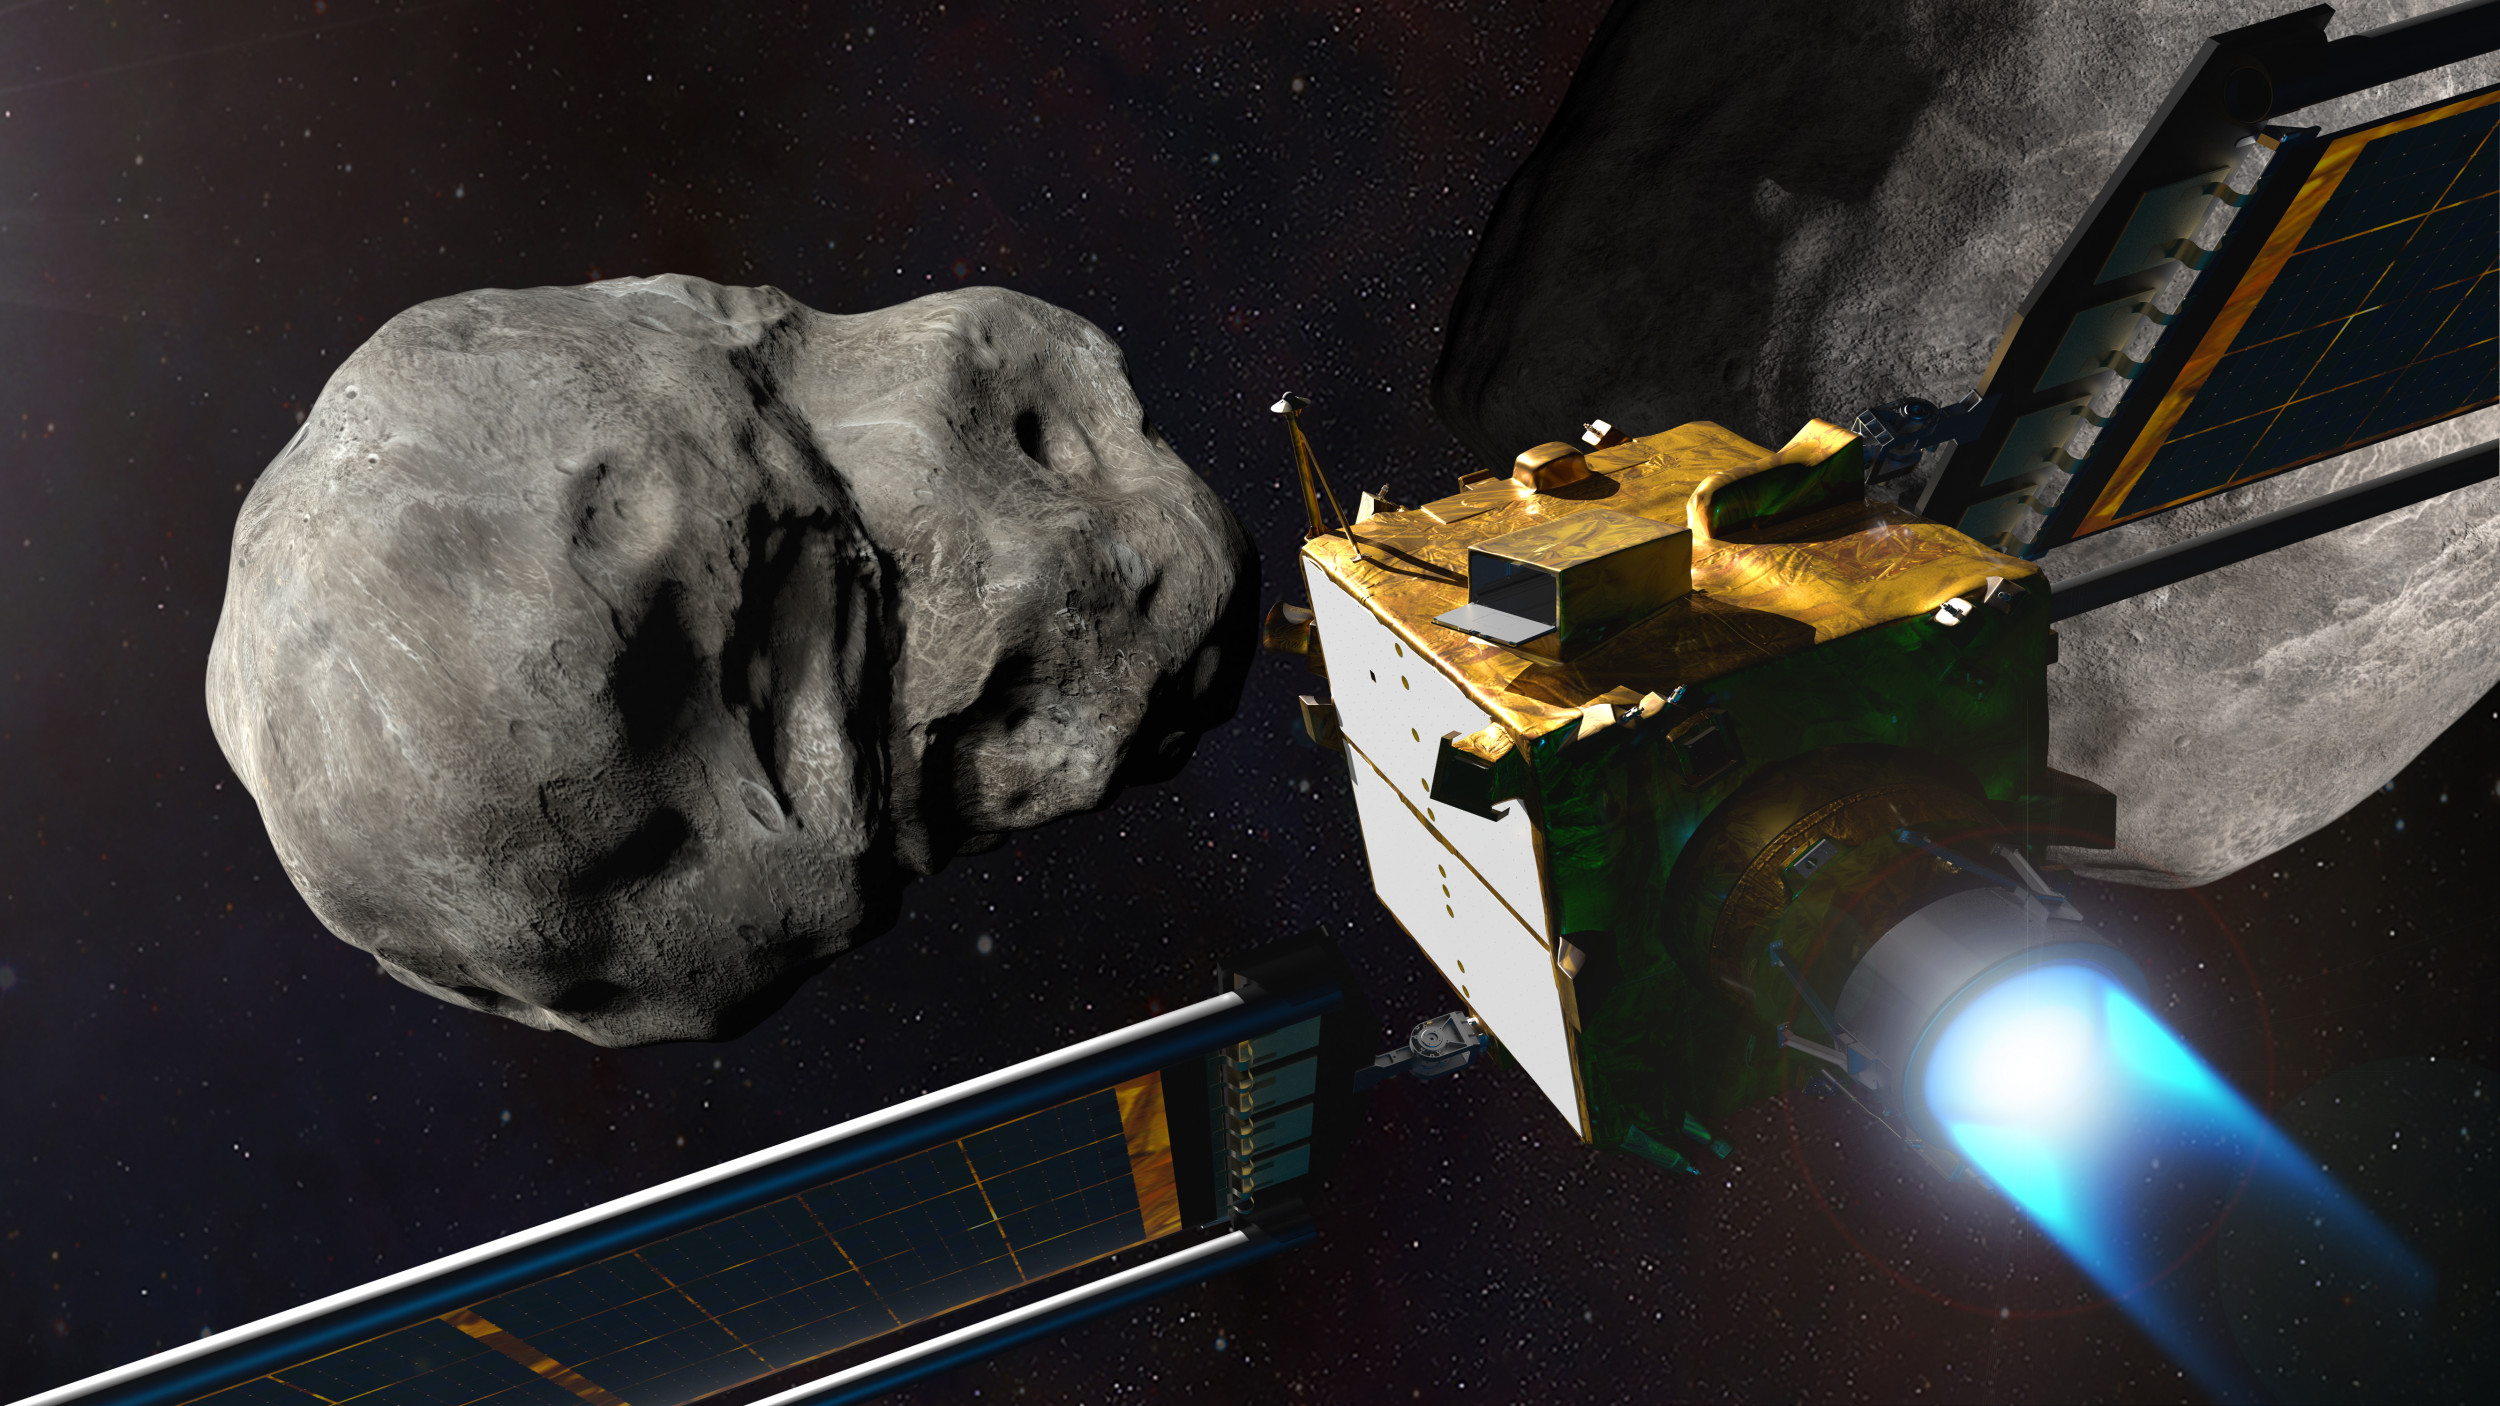 Watch Live As NASA Launches DART Mission to Smash Into Asteroid Newsweek